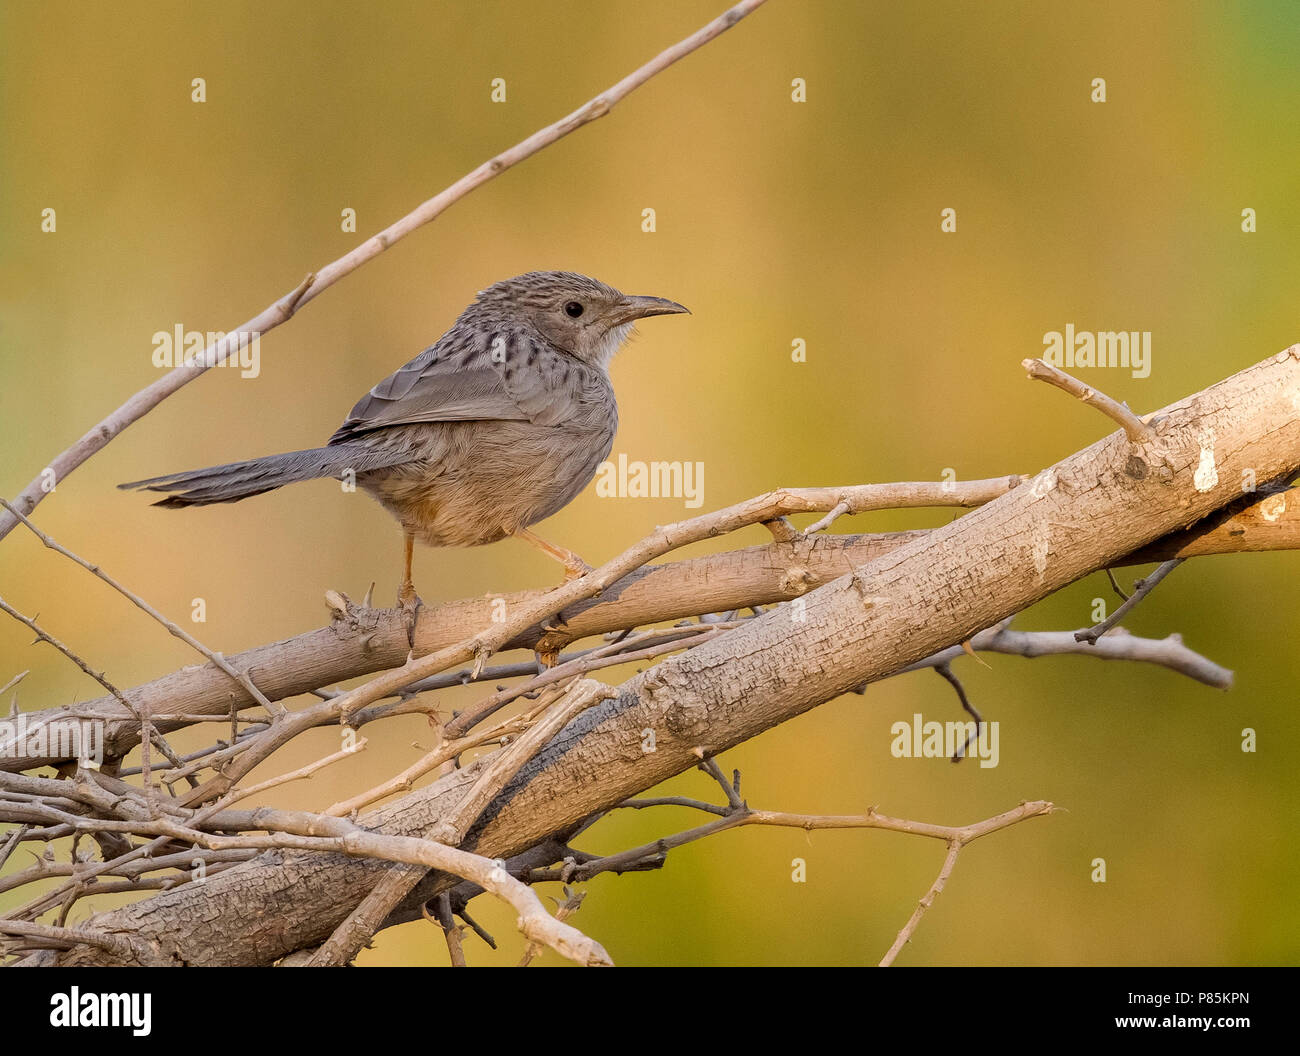 Afghan Babbler perched on branch in Kuwait. December 2010. Stock Photo